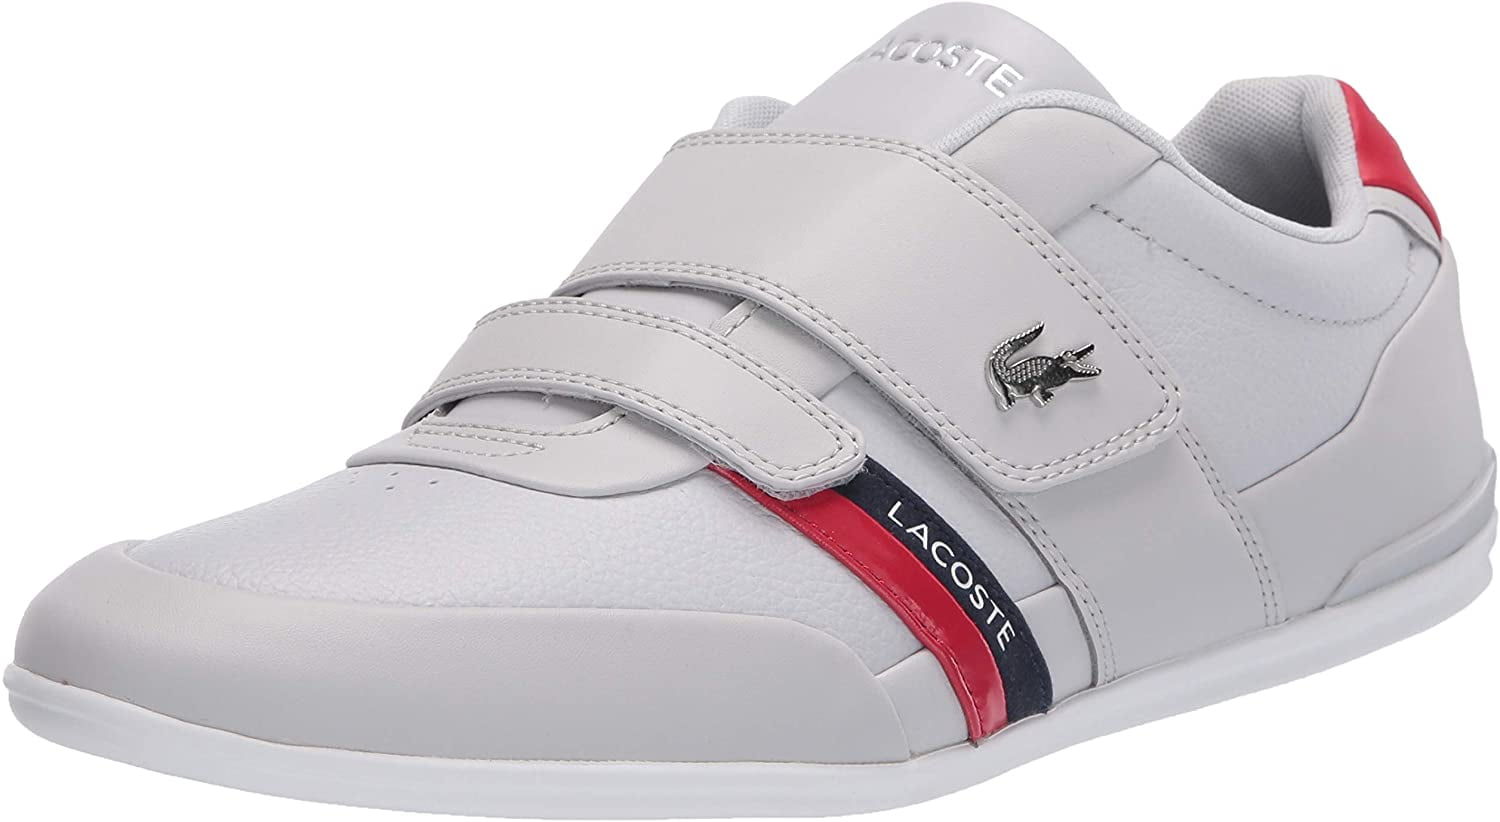 lacoste shoes misano